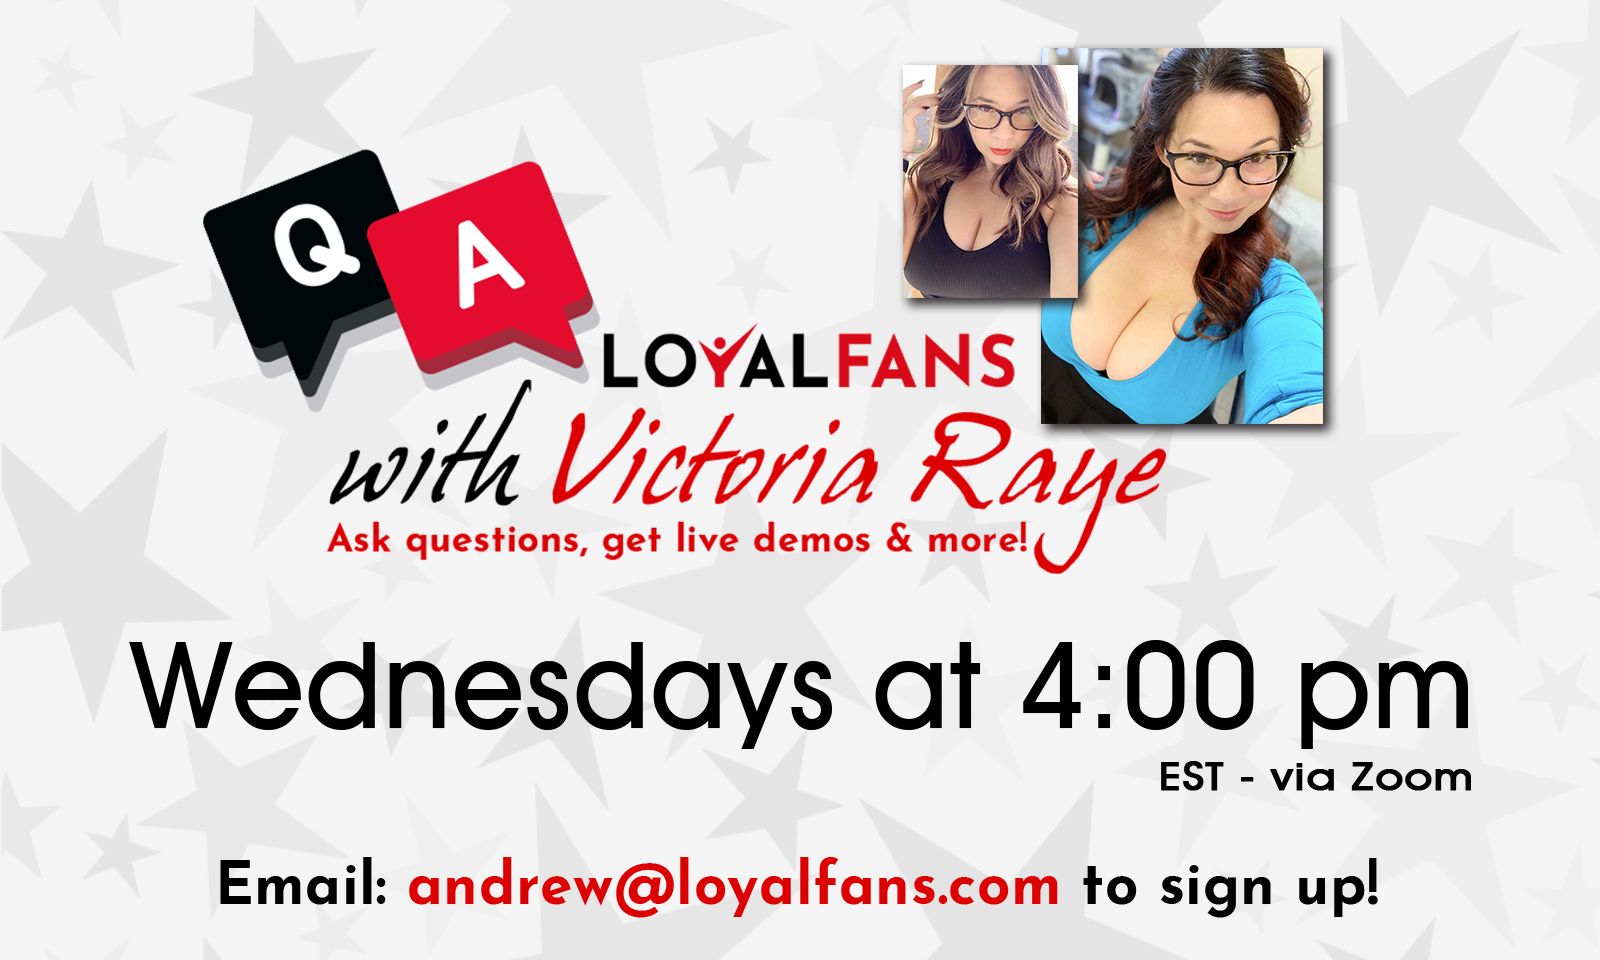 Loyalfans.com's Victoria Raye to Offer Weekly Q&A Events